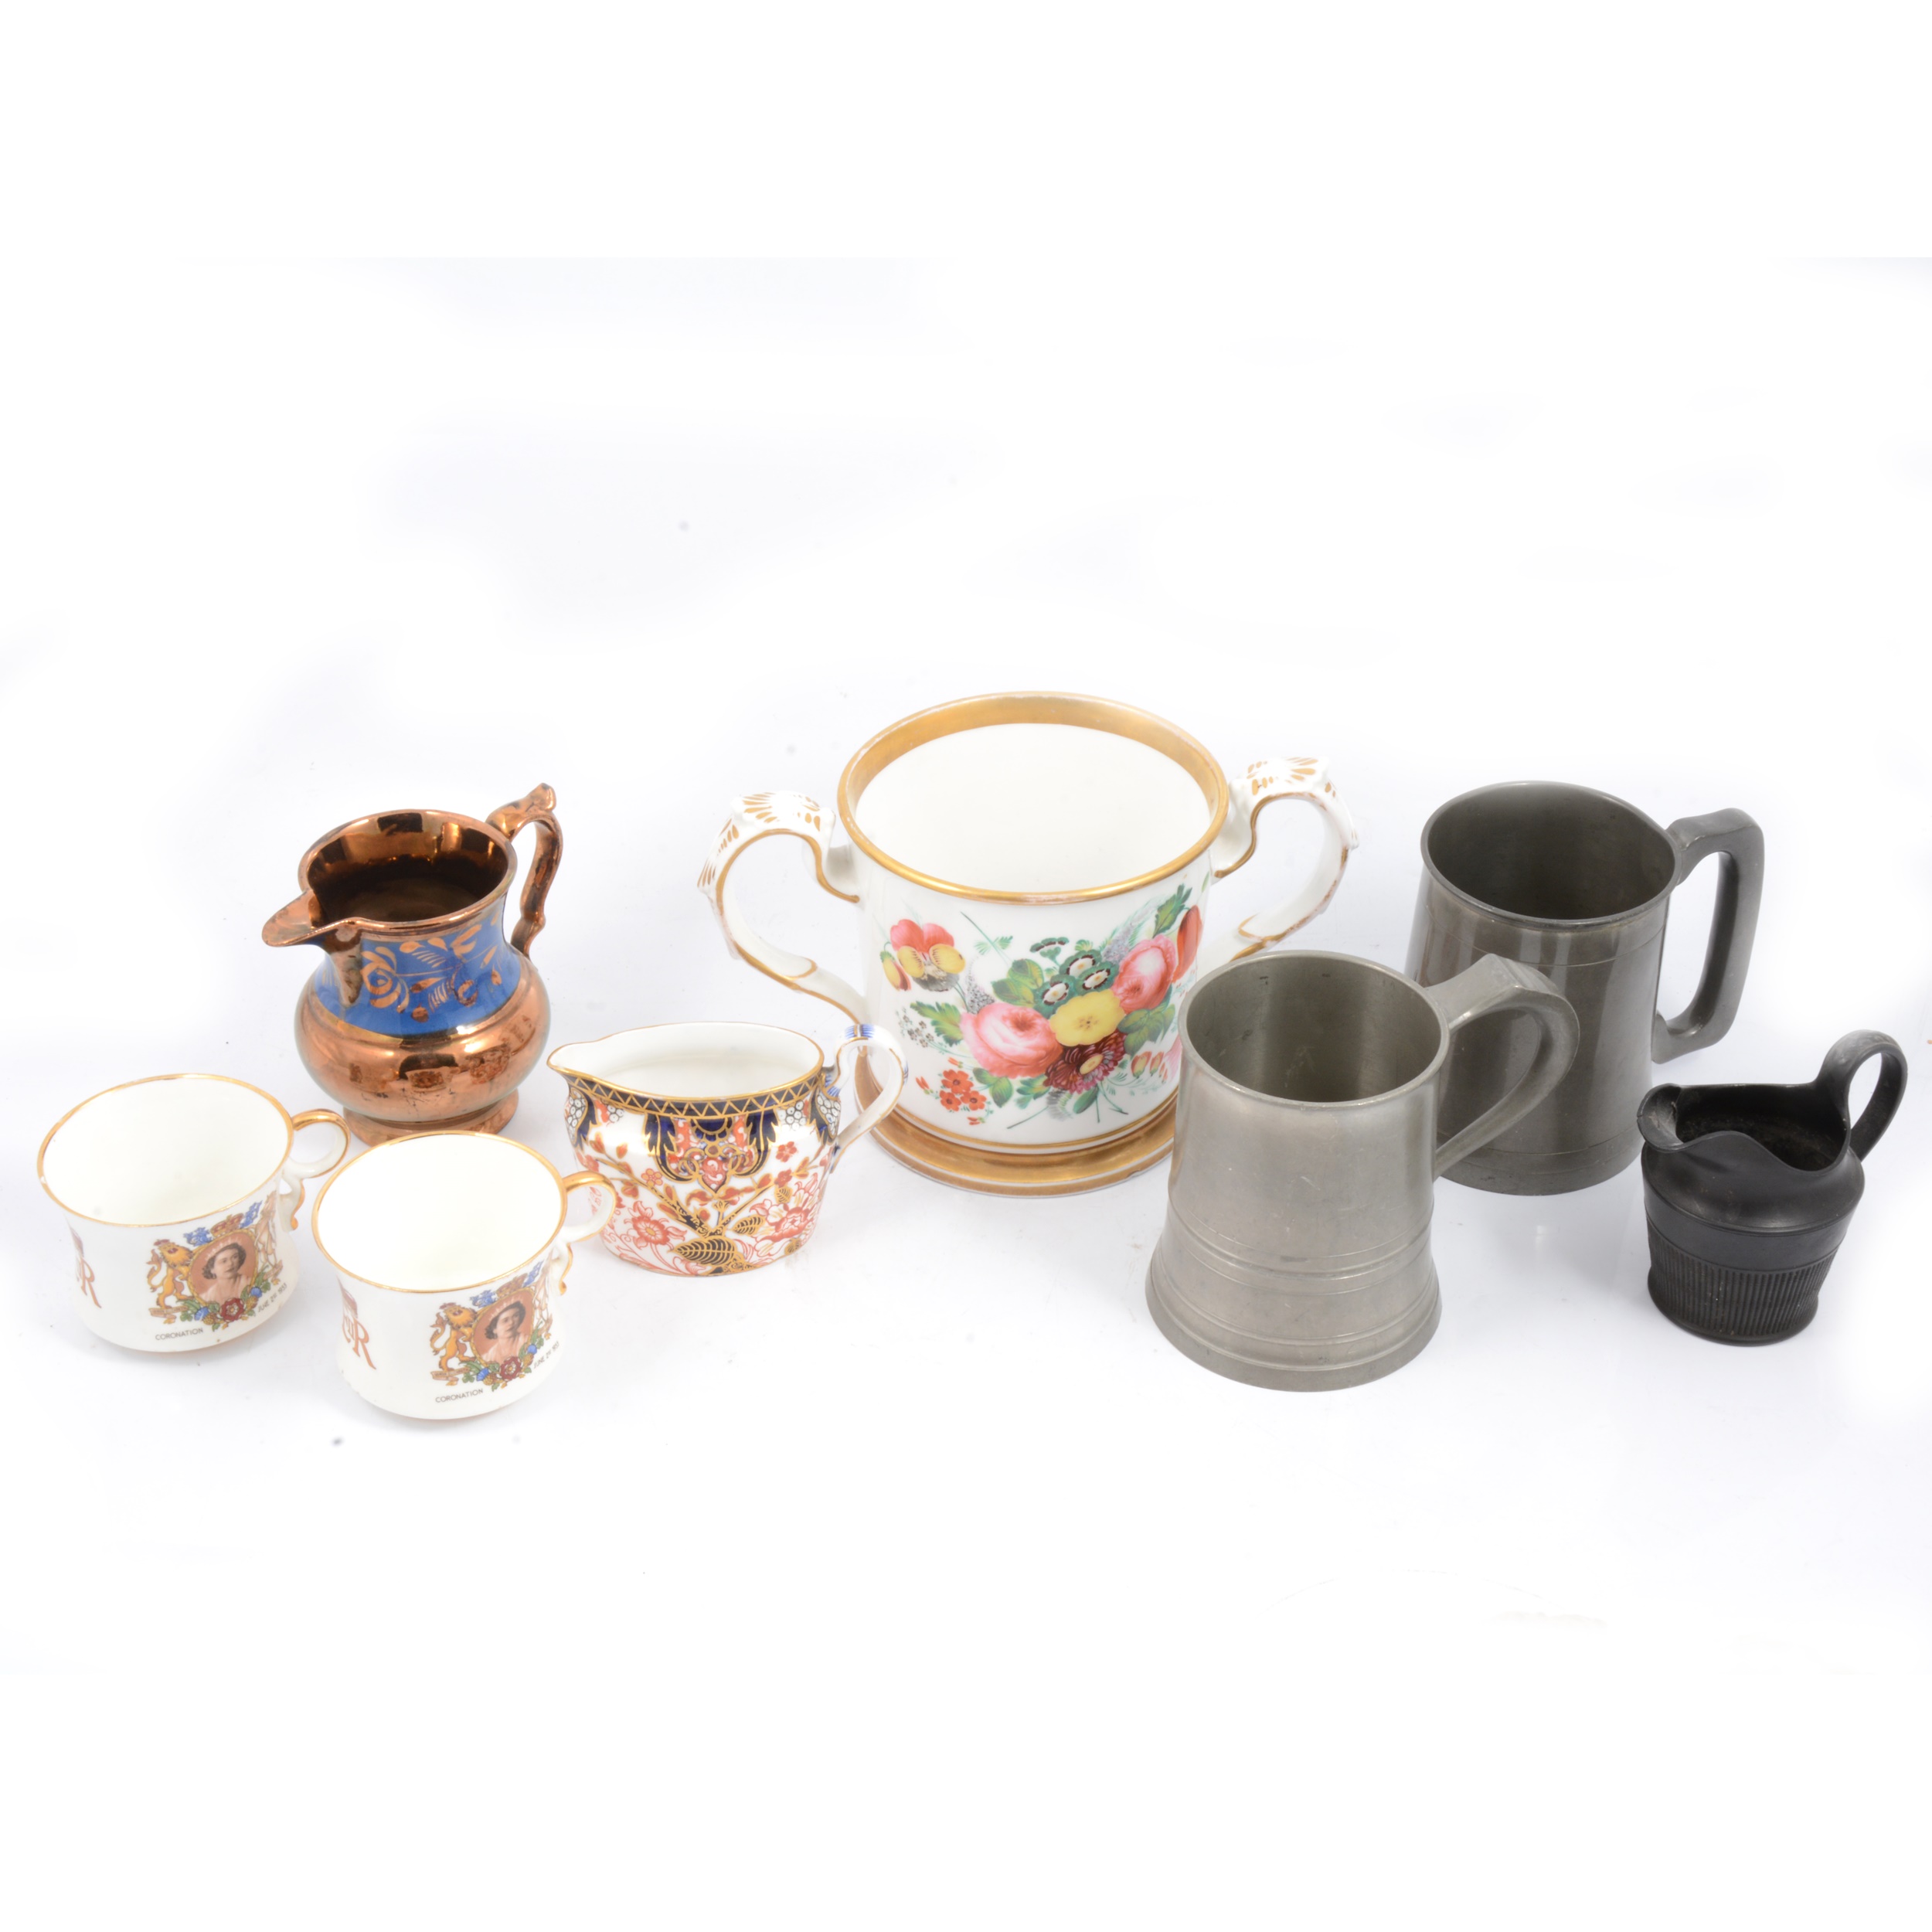 Porcelain Loving cup and other porcelain and pewter wares.